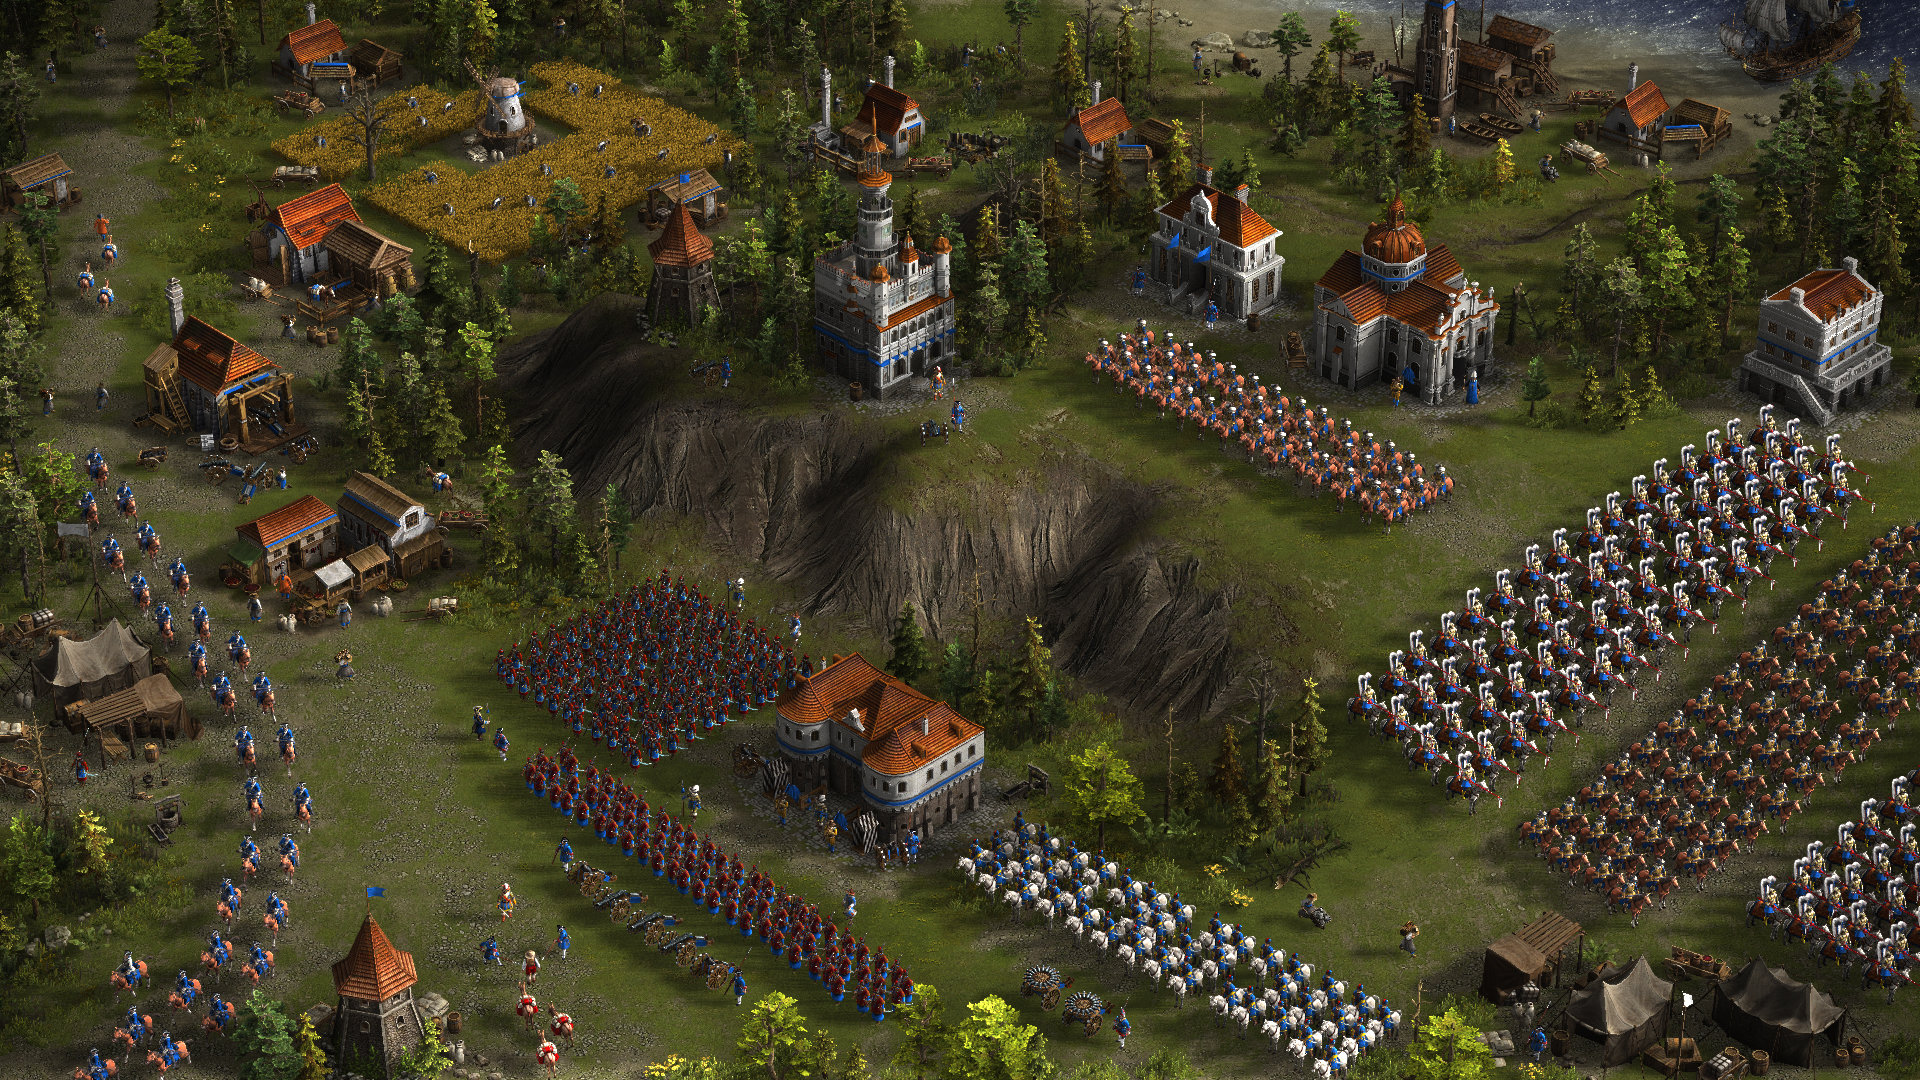 Deluxe Content Cossacks 3 Rise To Glory On Steam